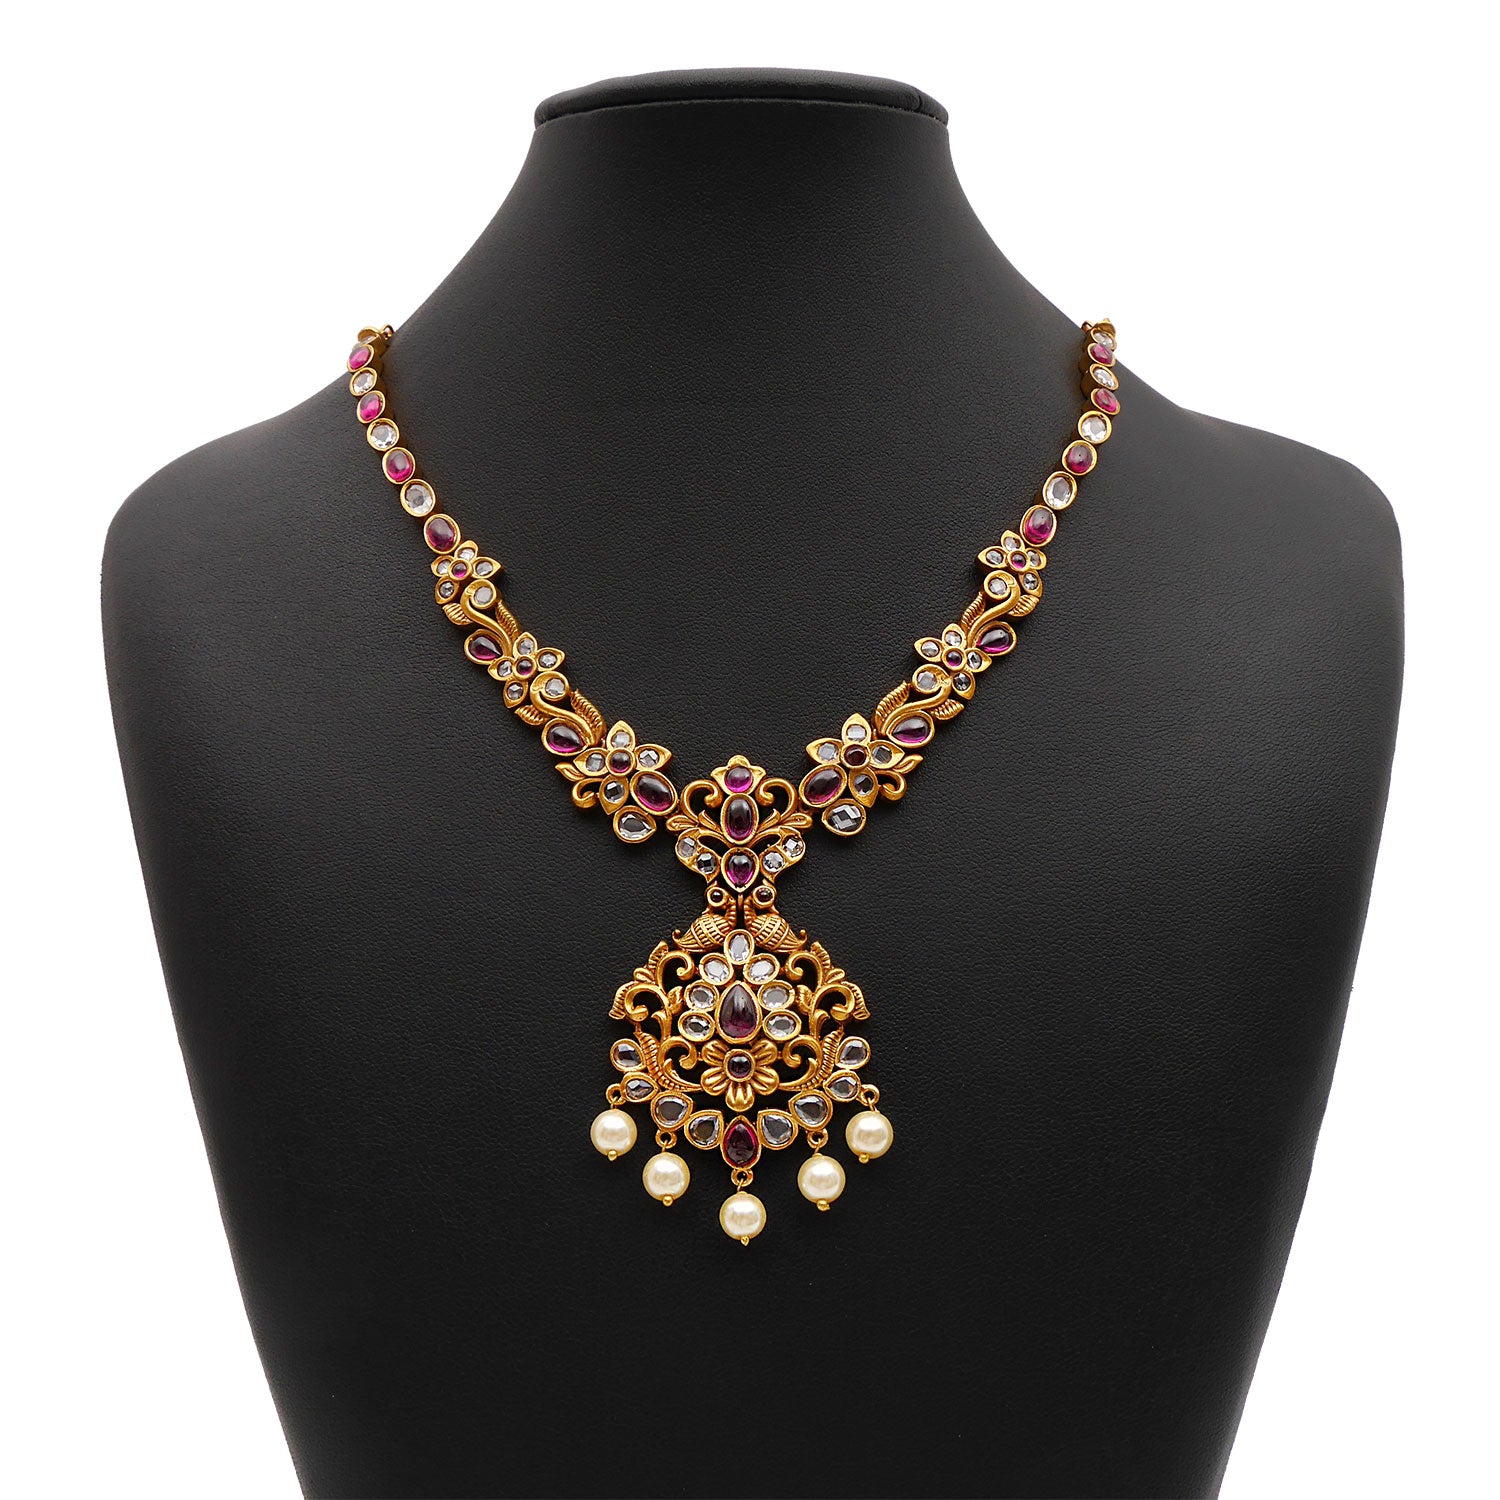 Darshini South-Indian Necklace Set in Ruby and White